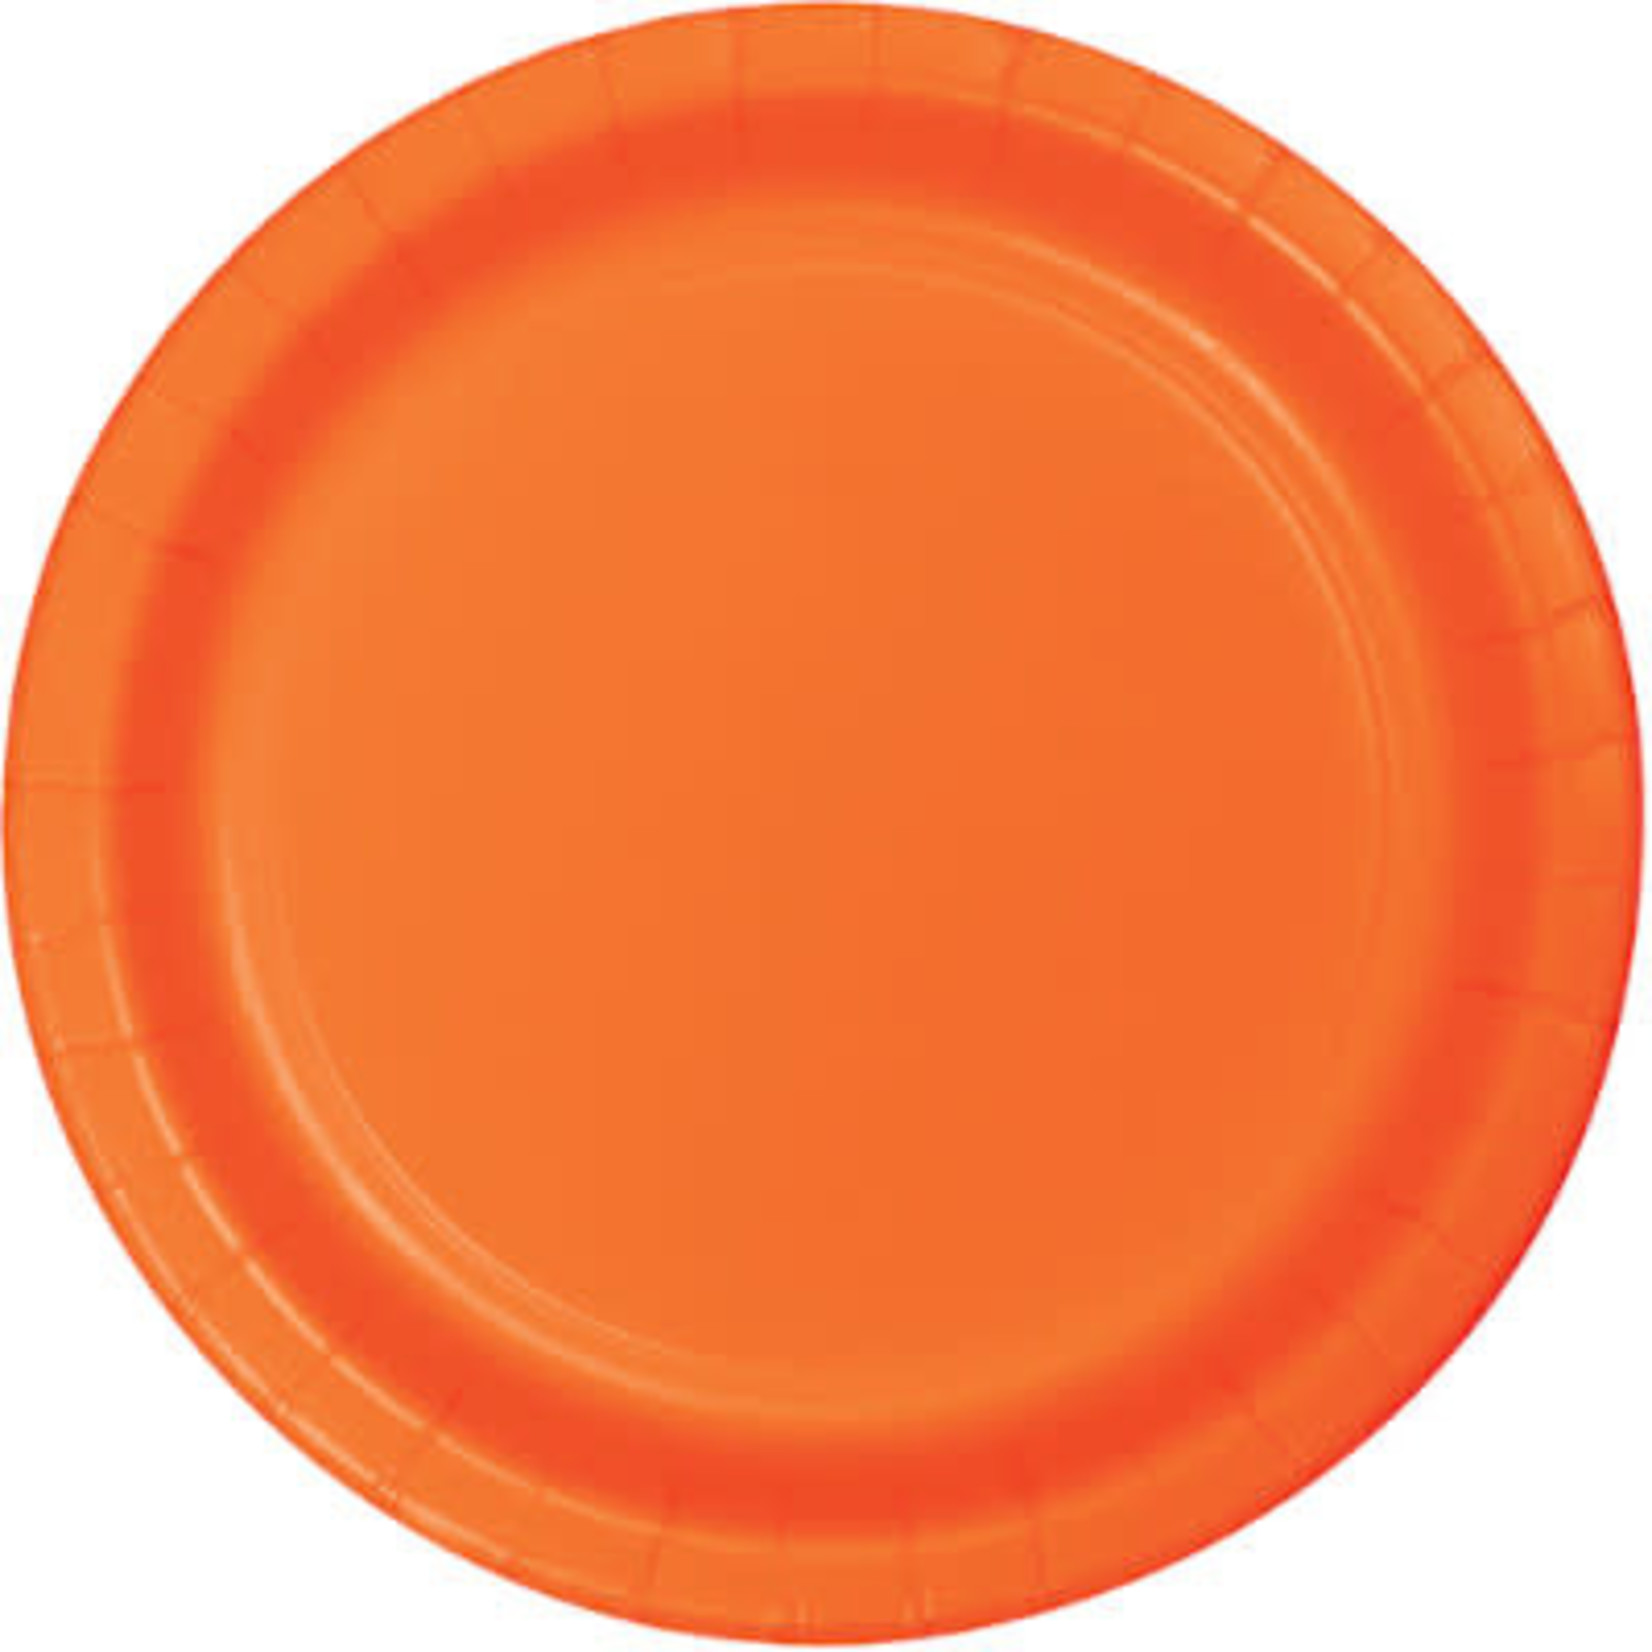 Touch of Color 7" Sunkissed Orange Paper Plates - 24ct.